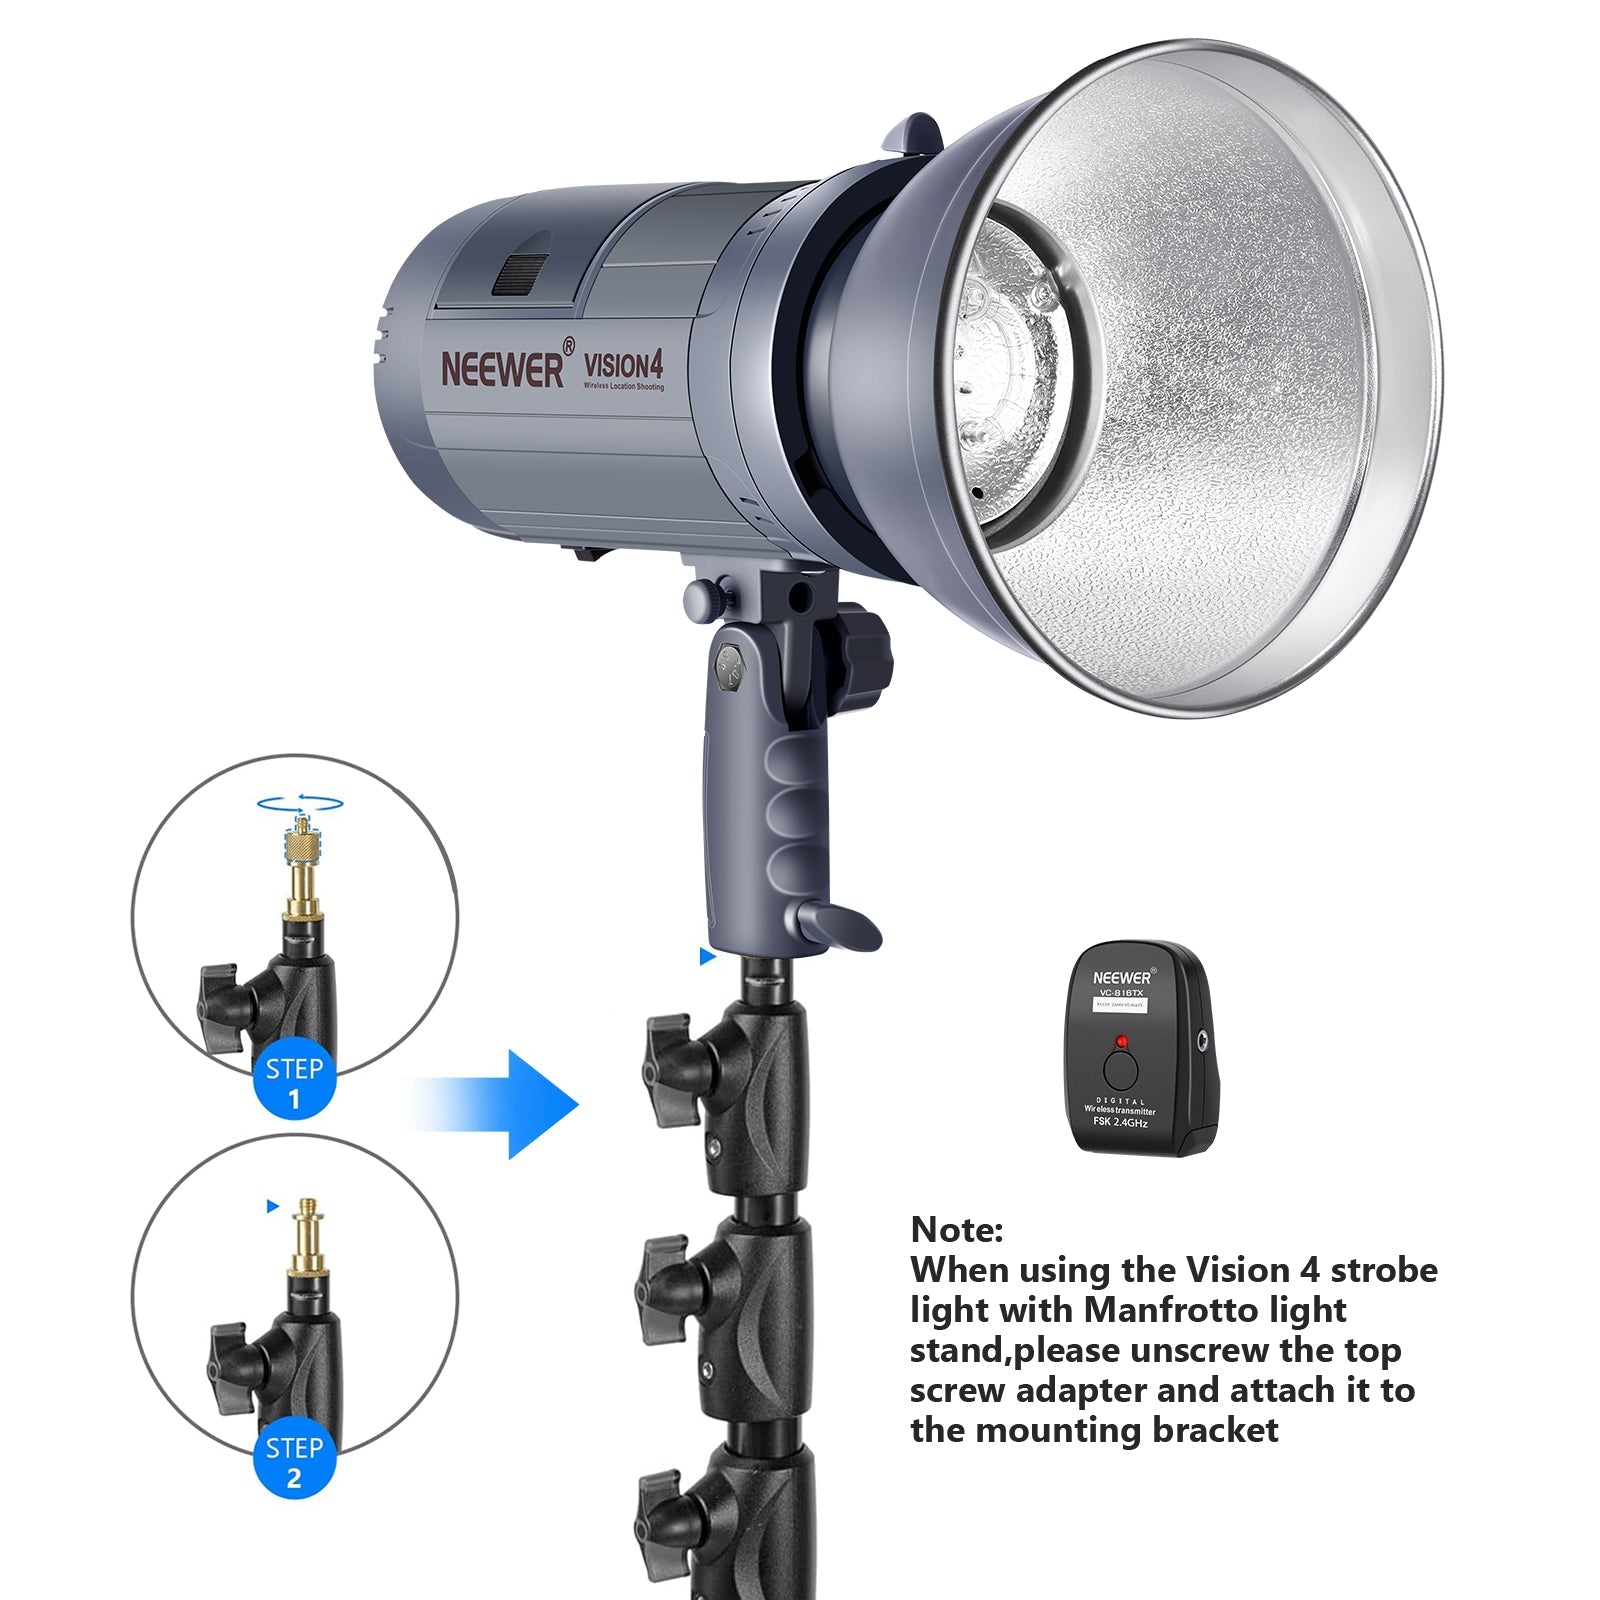 Neewer Vision 4 300W GN60 Outdoor Studio Flash Strobe Li-ion Battery Powered Cordless Monolight with 2.4G Wireless Trigger